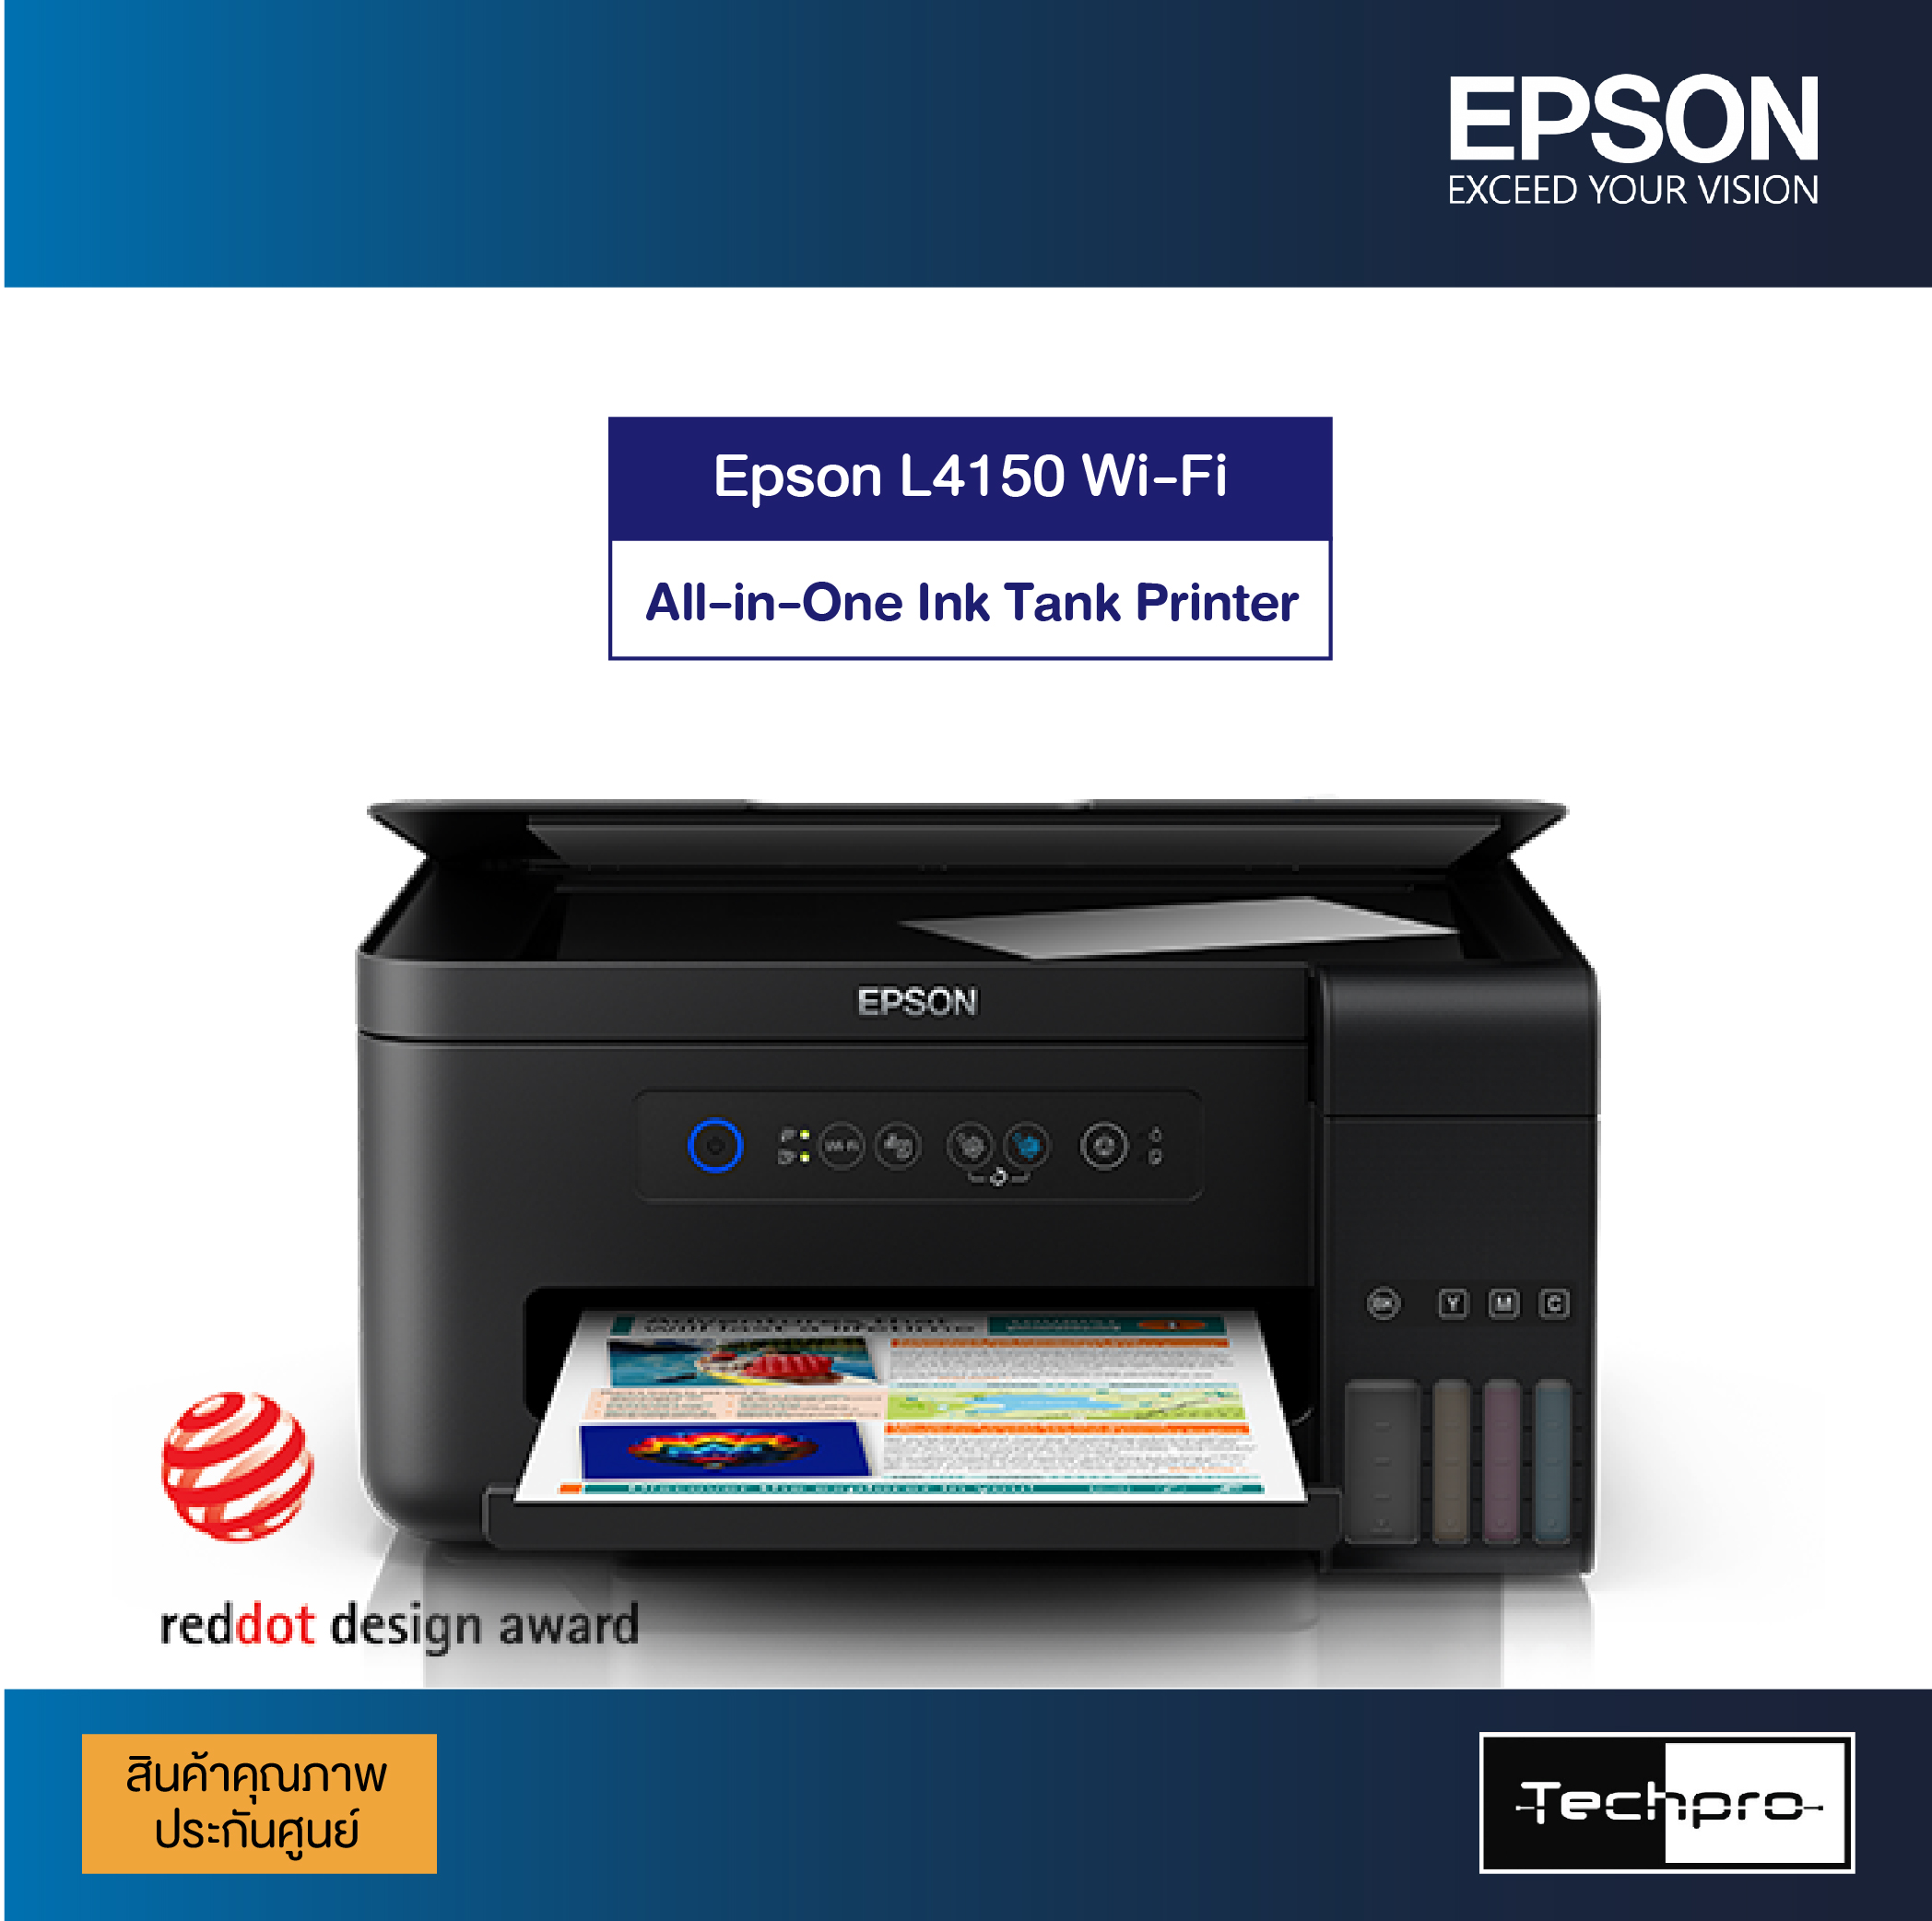 Epson L4150 Wi Fi All In One Ink Tank Printer Techpro 9358